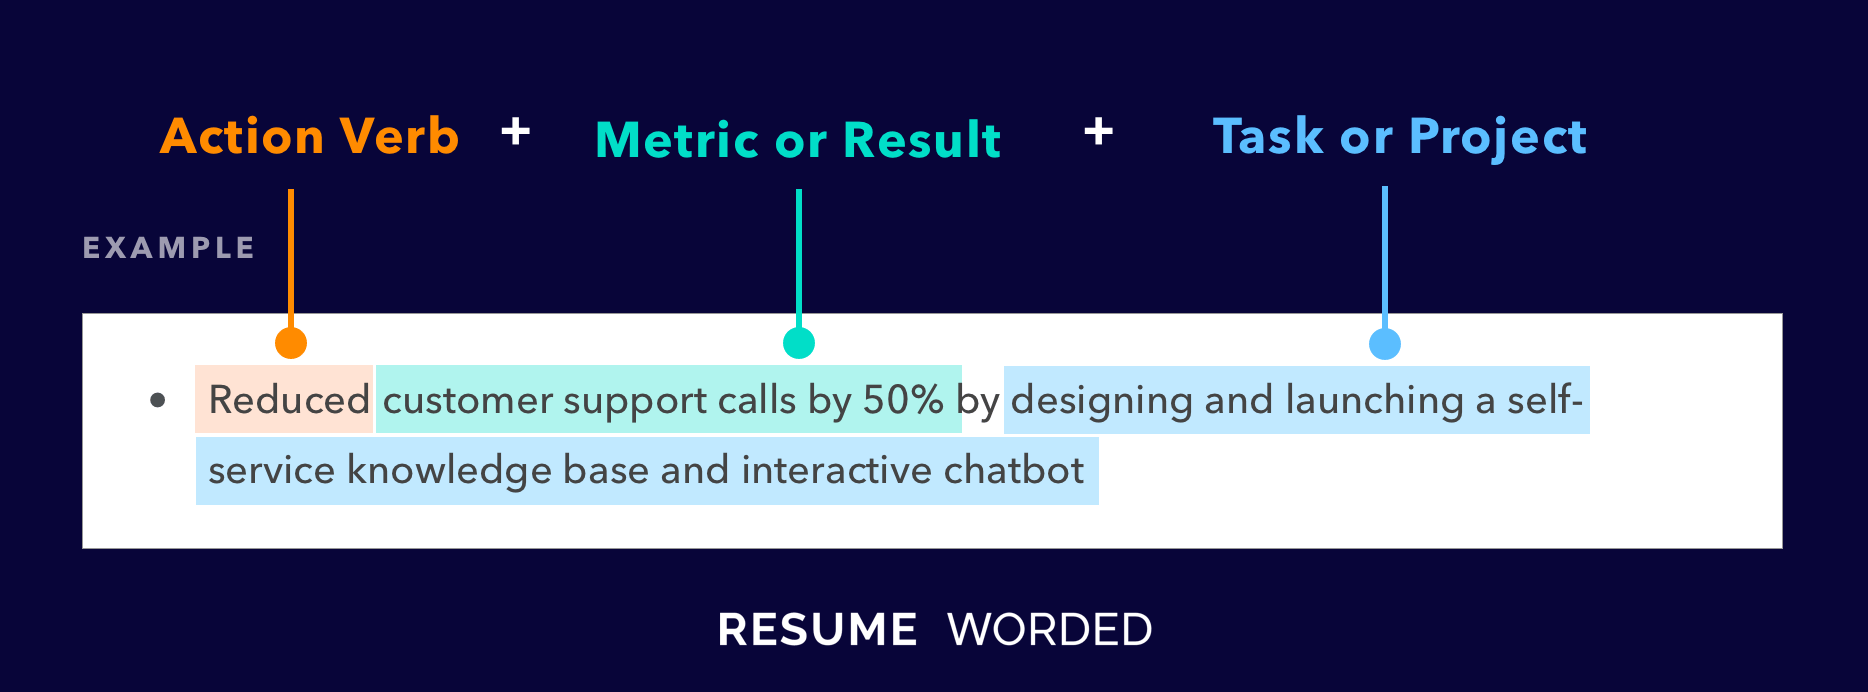 Use metrics to quantify your impact with IT accomplishments - IT Manager Resume